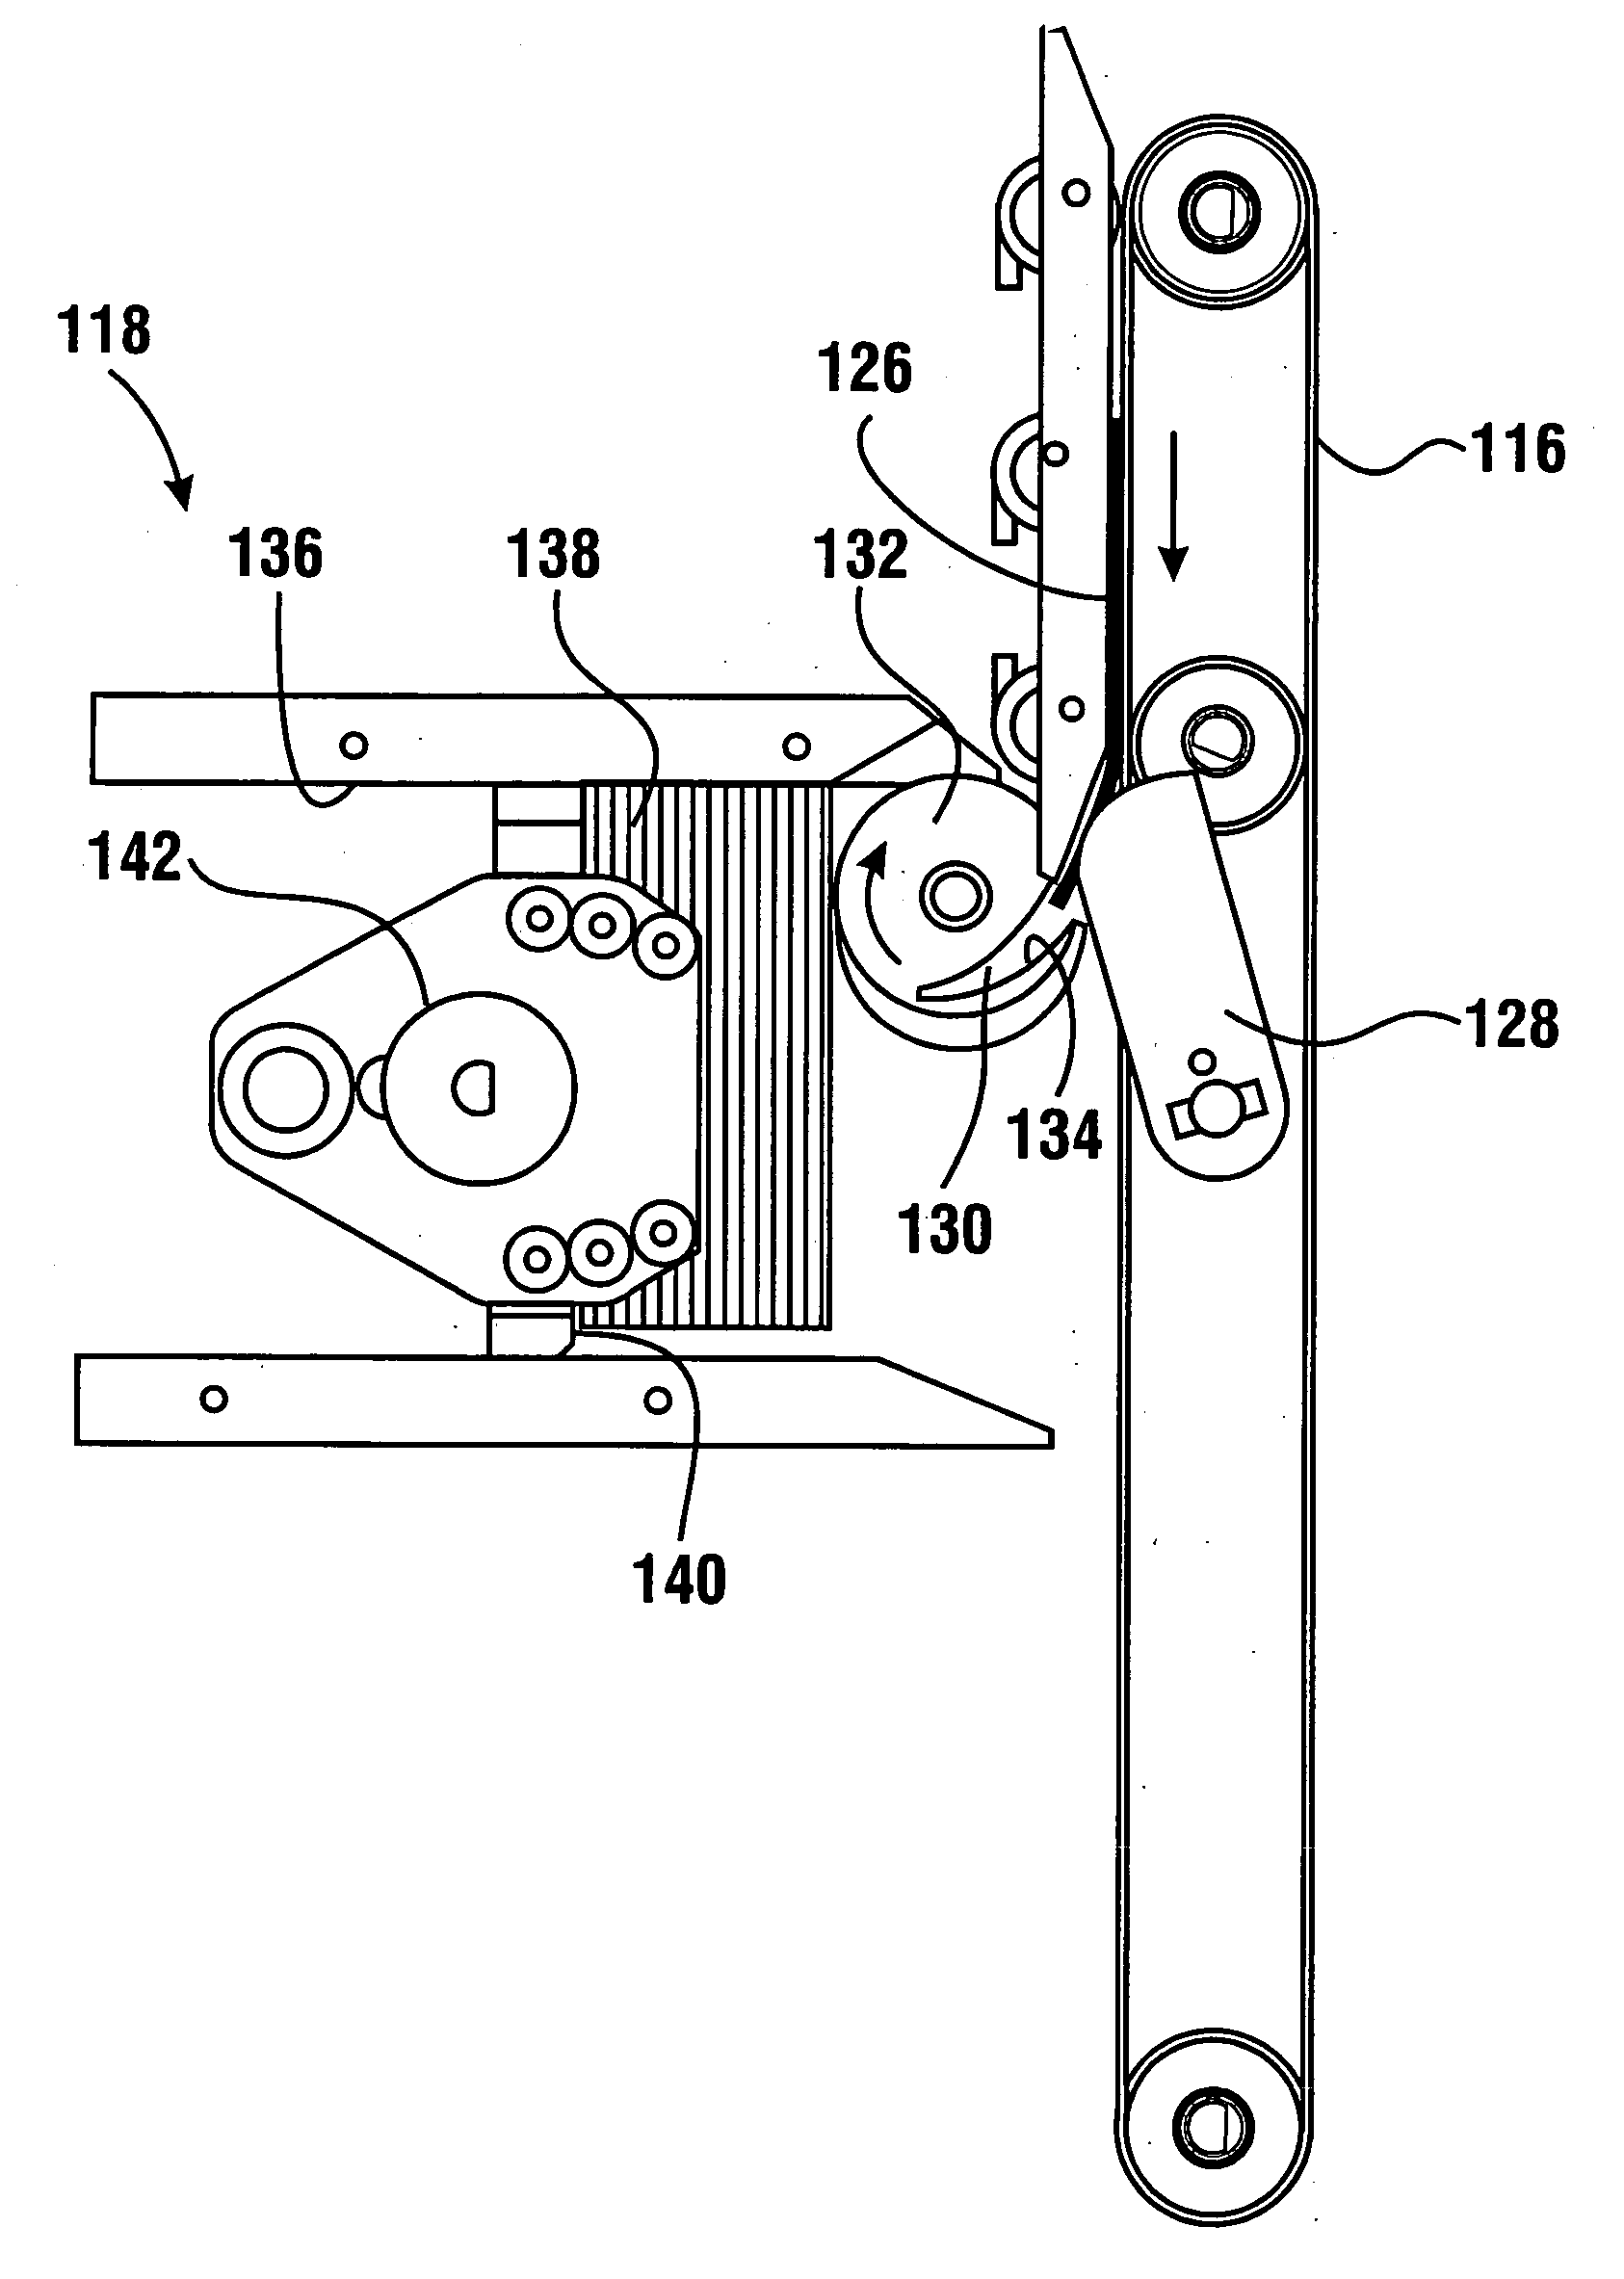 Cash dispensing automated banking machine with note unstacking and validation